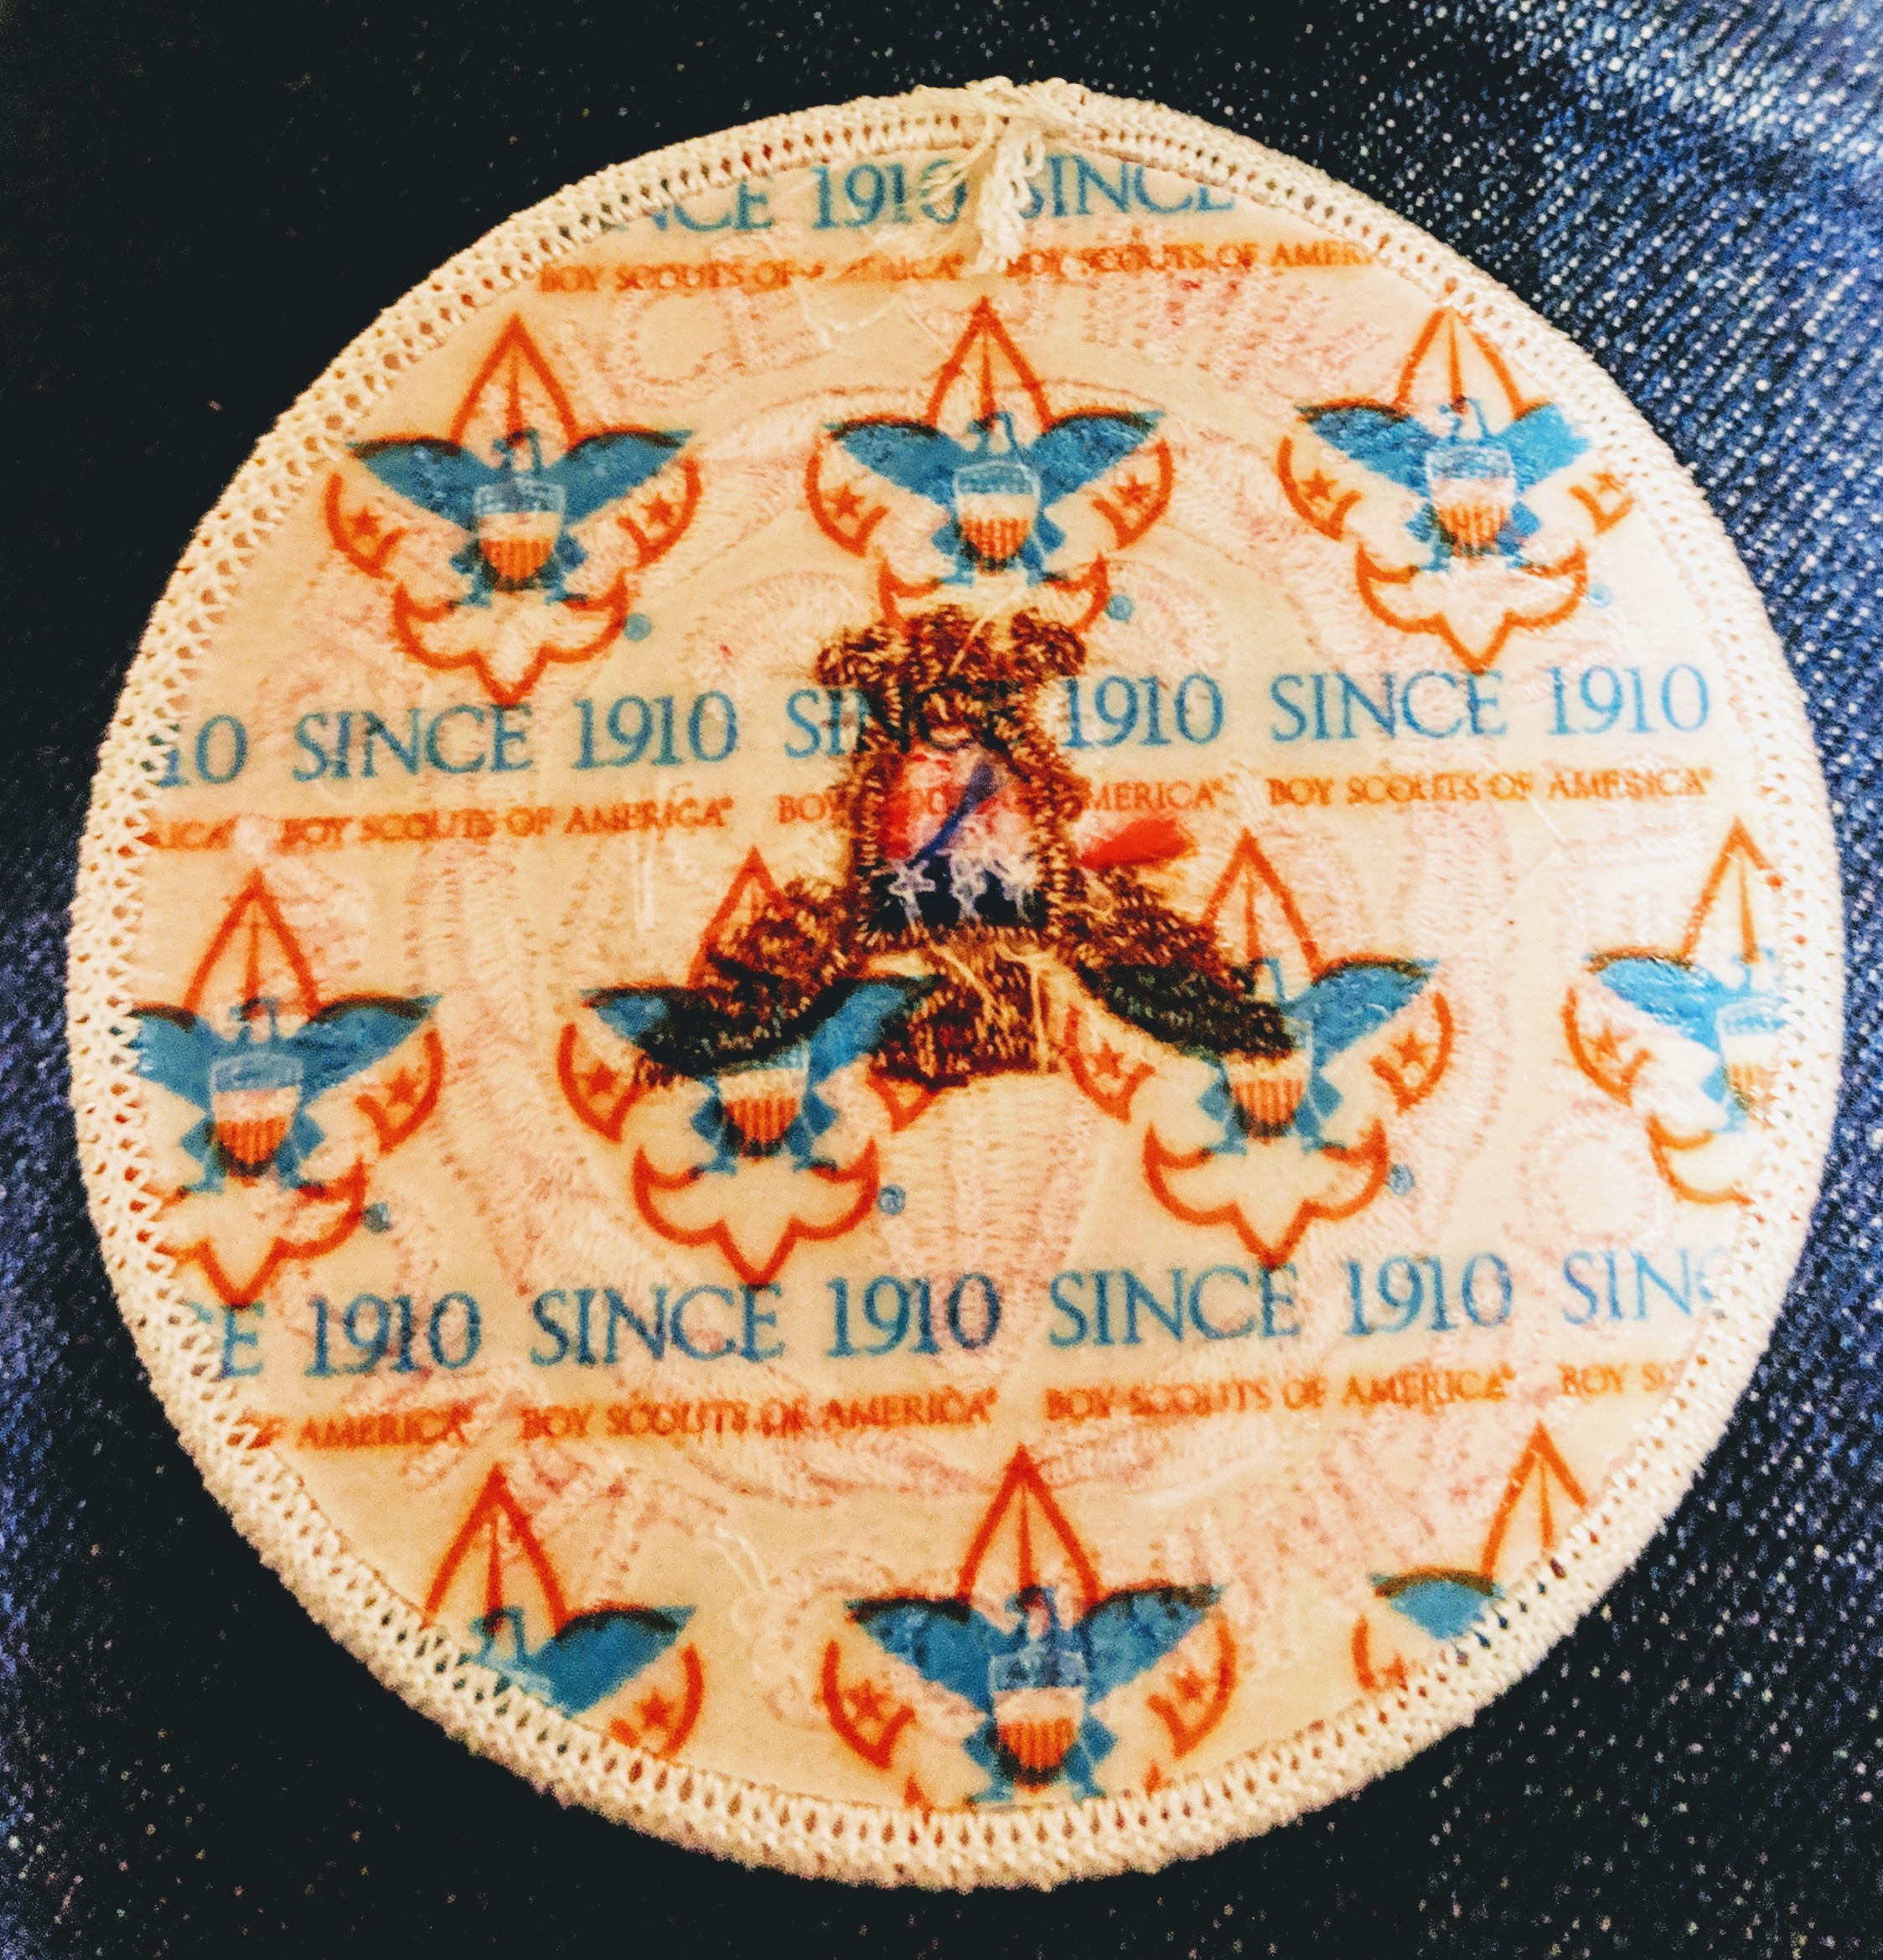 BOY SCOUTS CUBS WEBELOS EXPLORES WORLD CREST RING PATCH  NEW "SINCE 1910 BACK" 